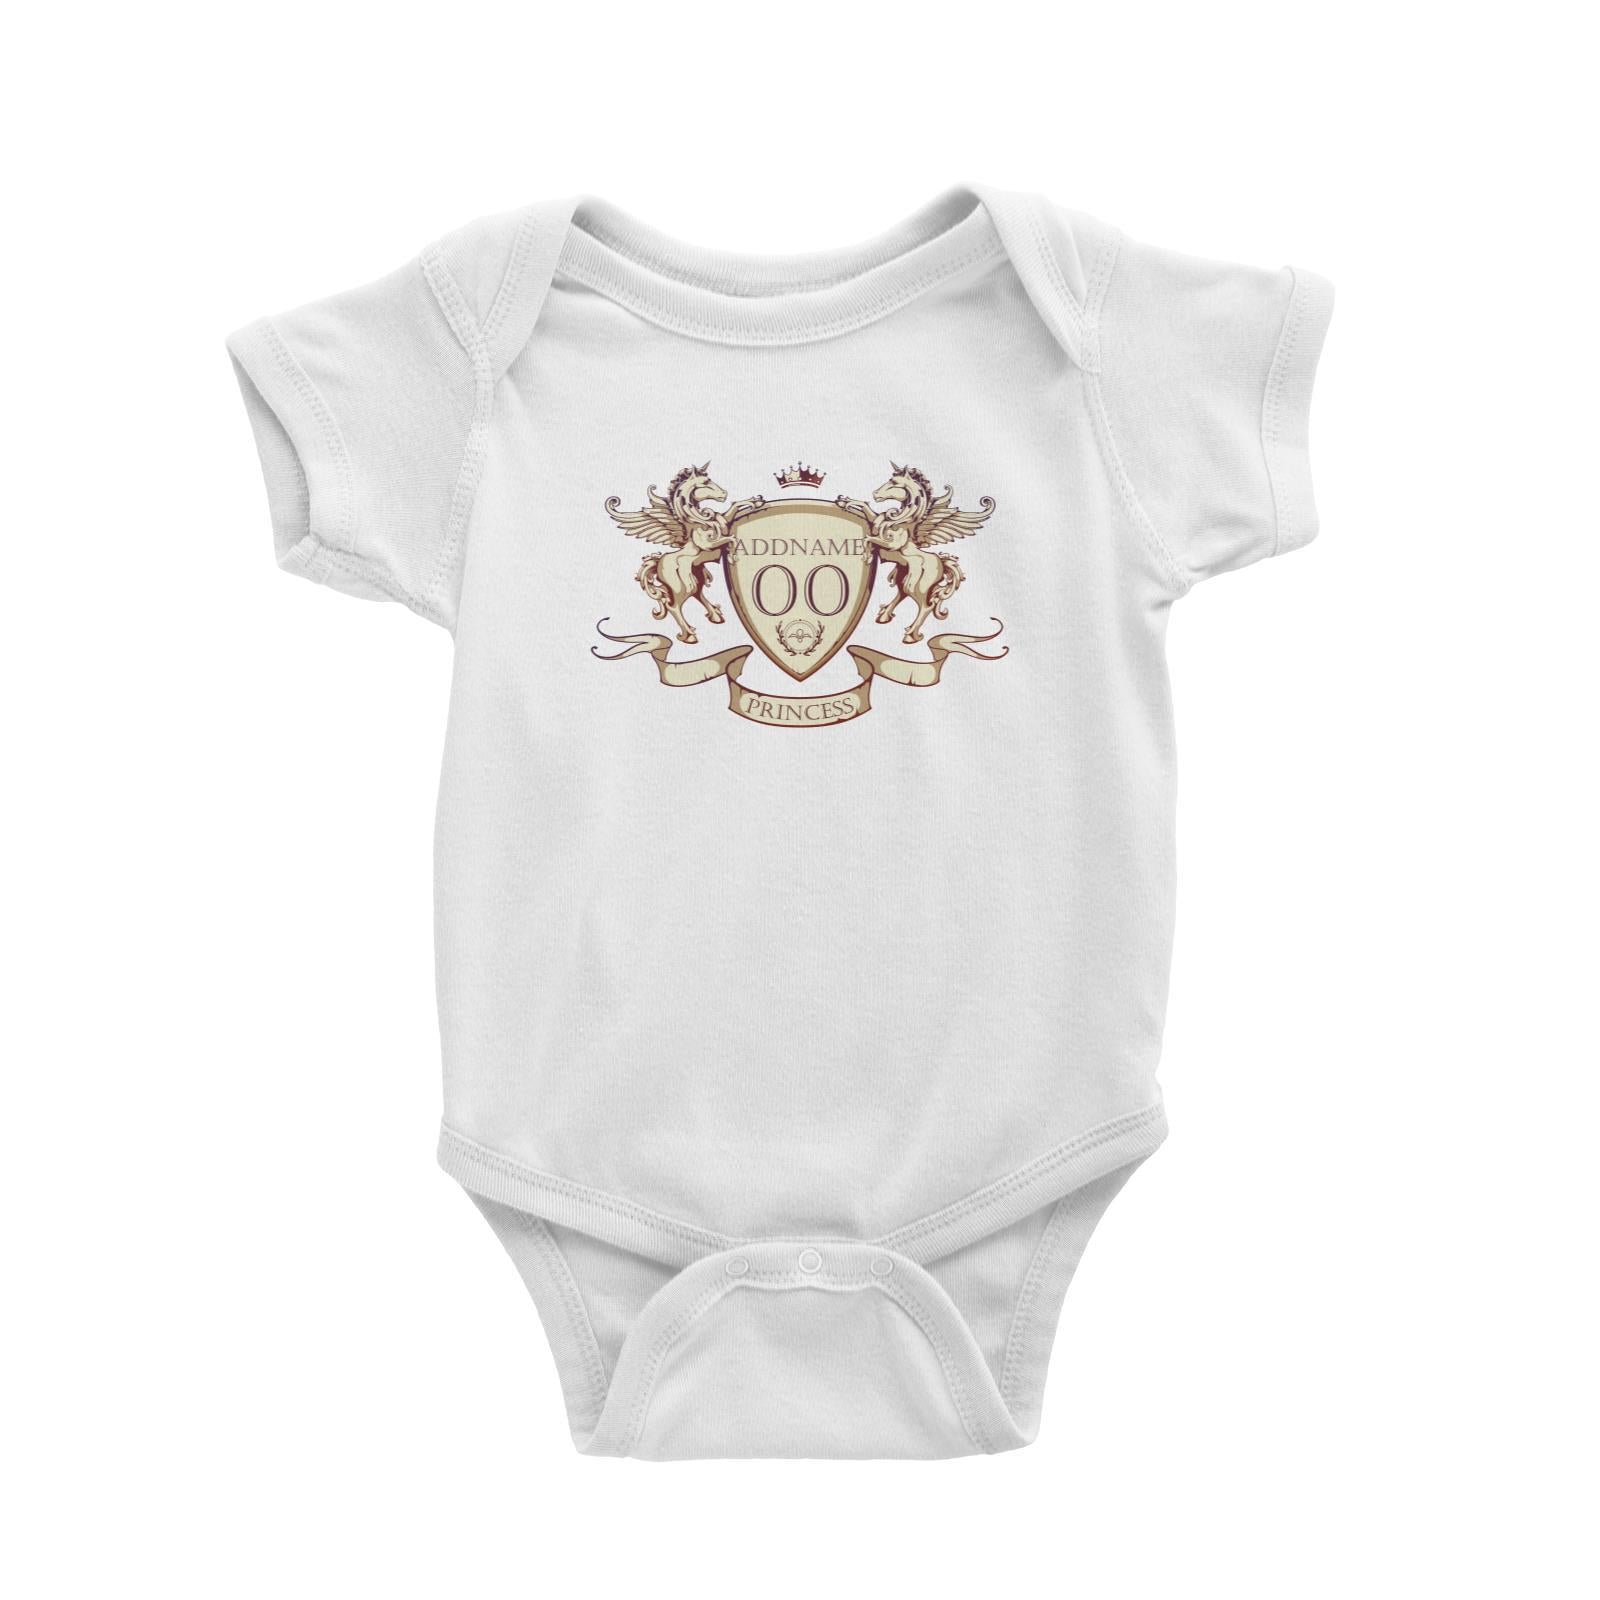 Horse Royal Emblem Princess Personalizable with Name and Number Baby Romper